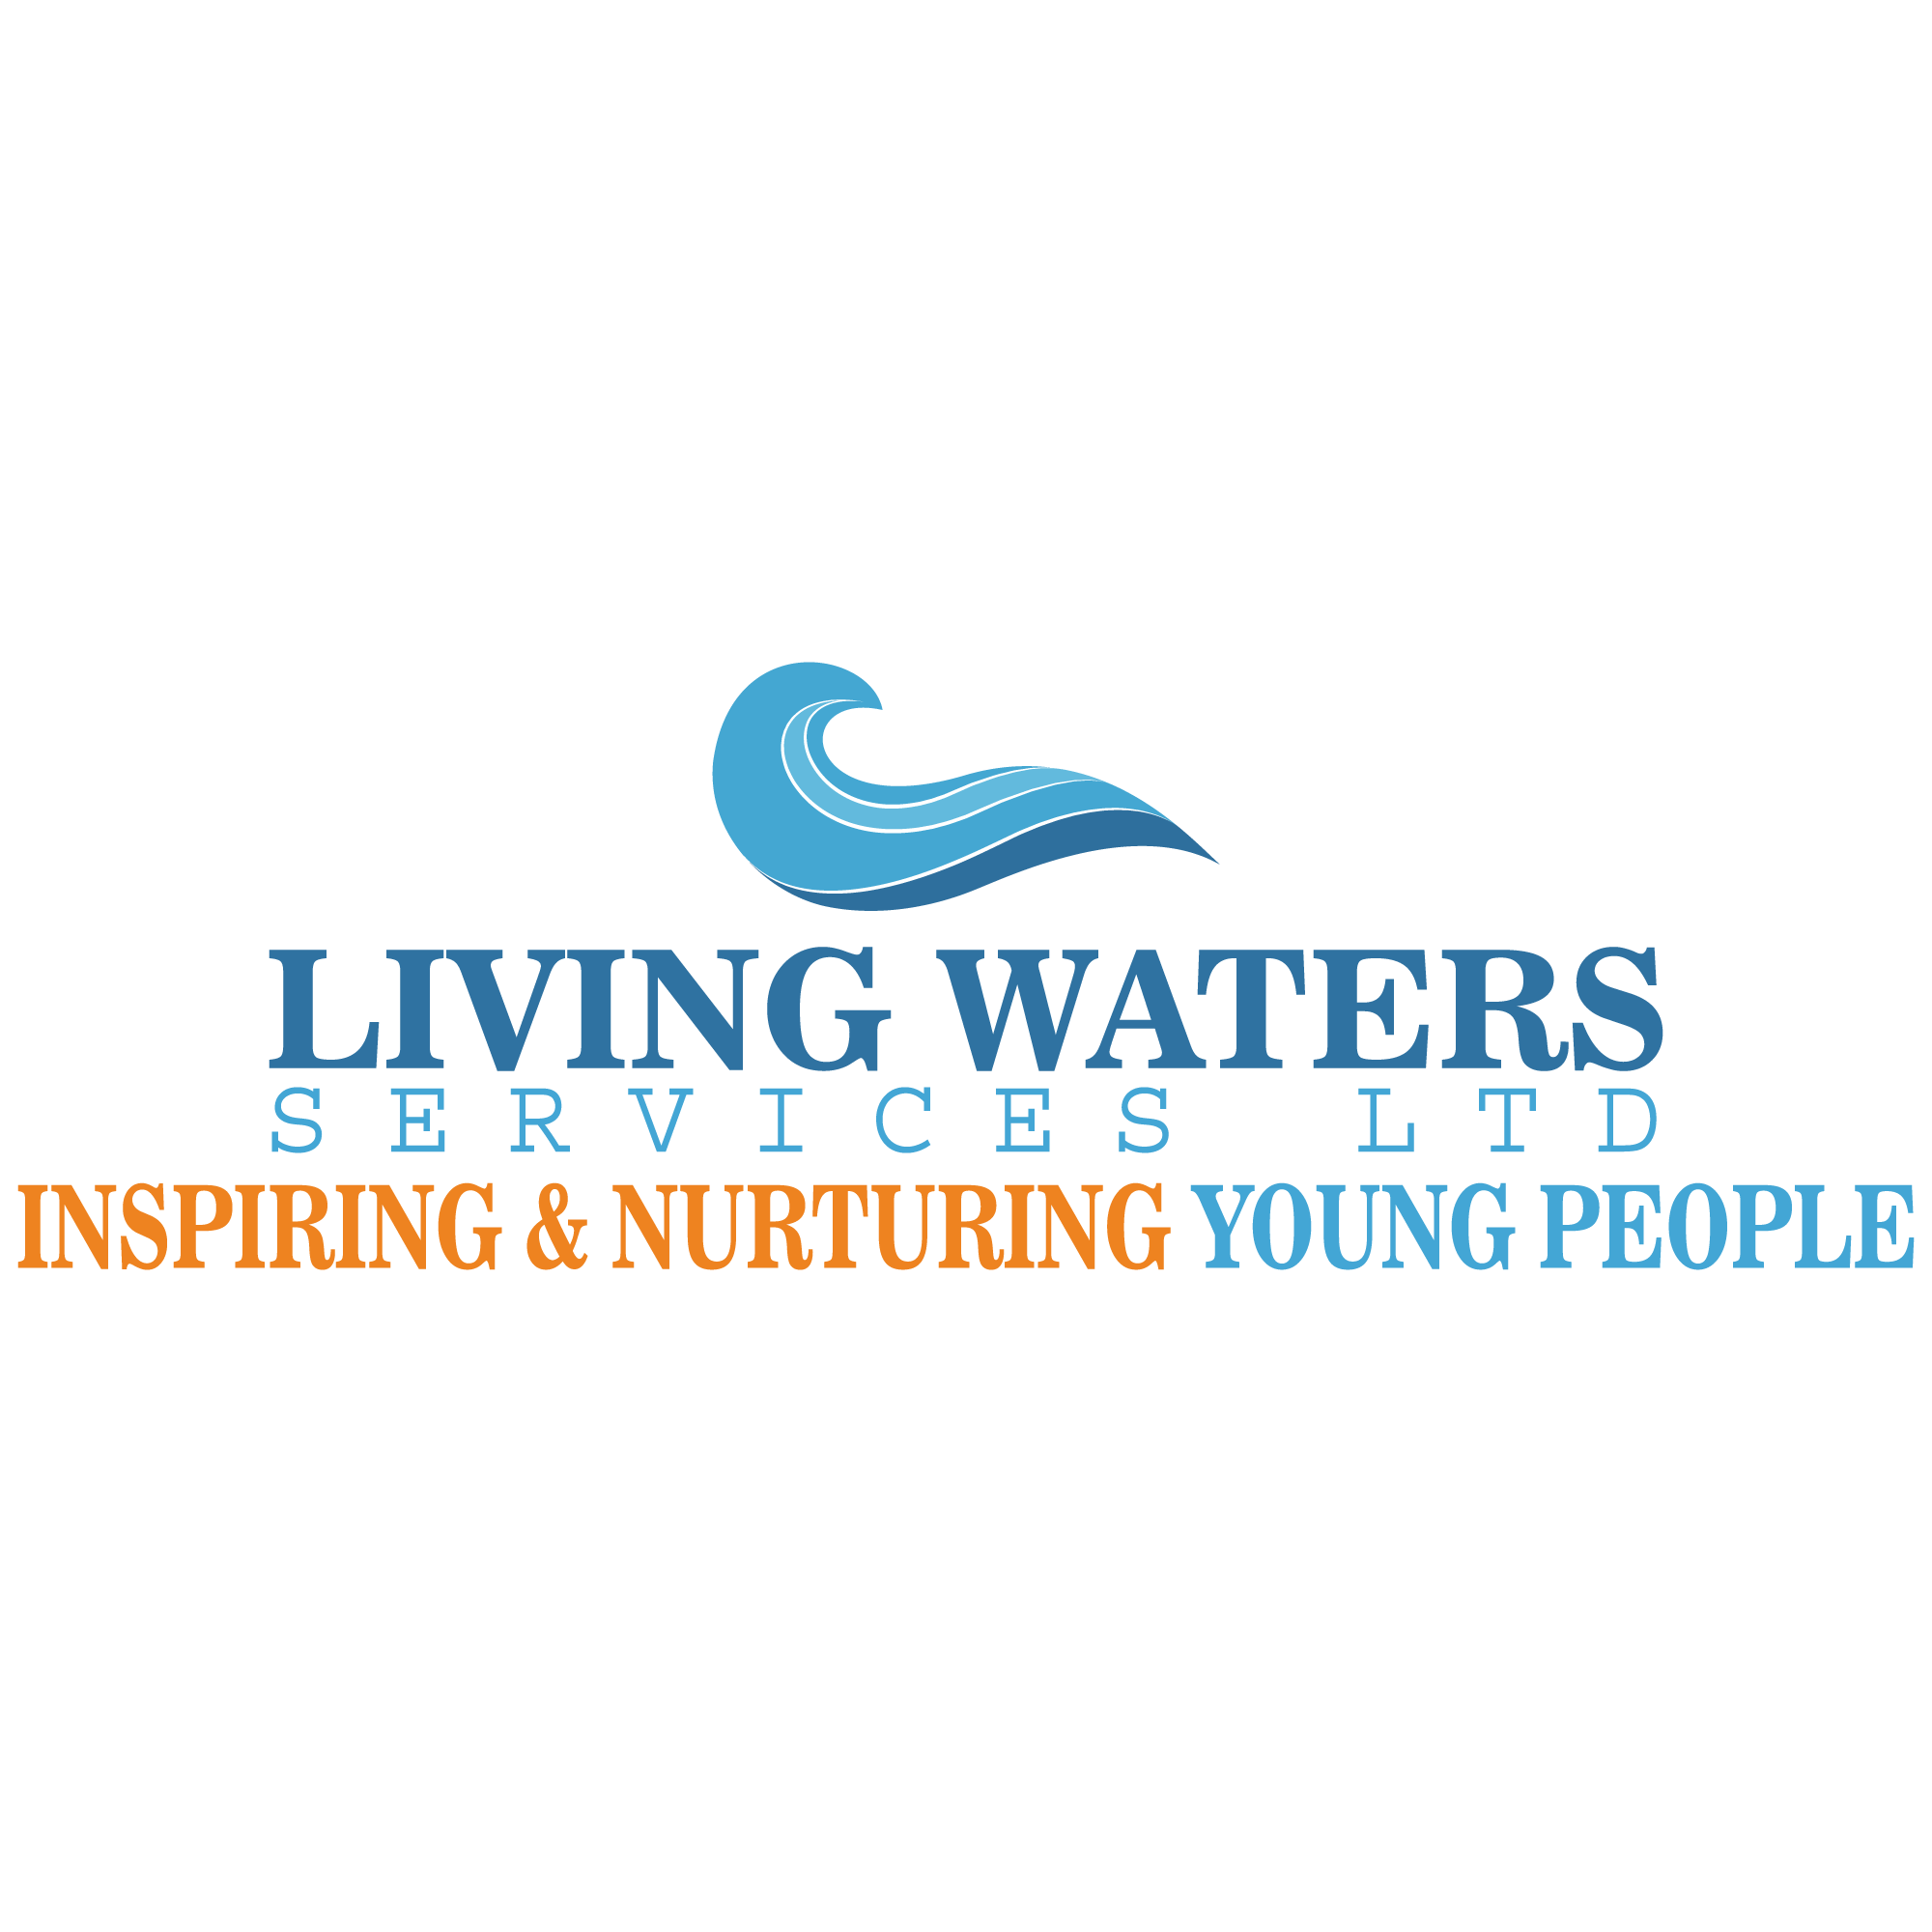 Living Waters business logo